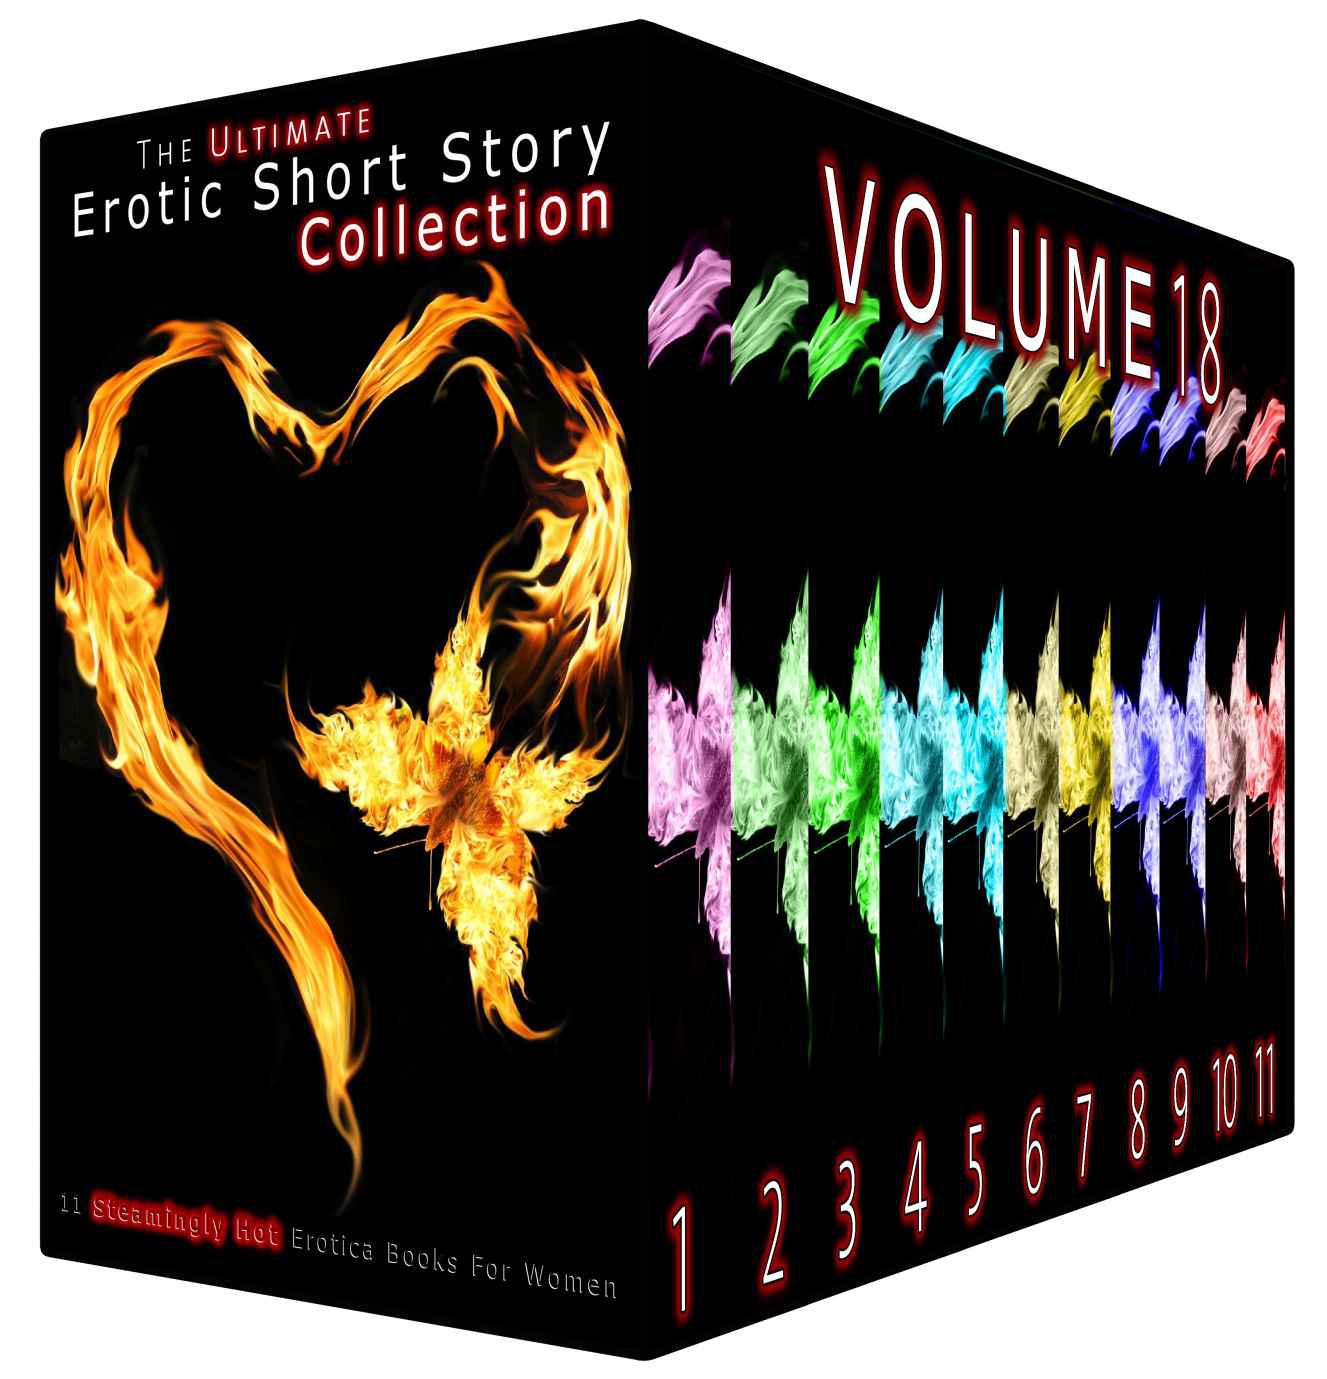 The Ultimate Erotic Short Story Collection 18: 11 Steamingly Hot Erotica Books For Women